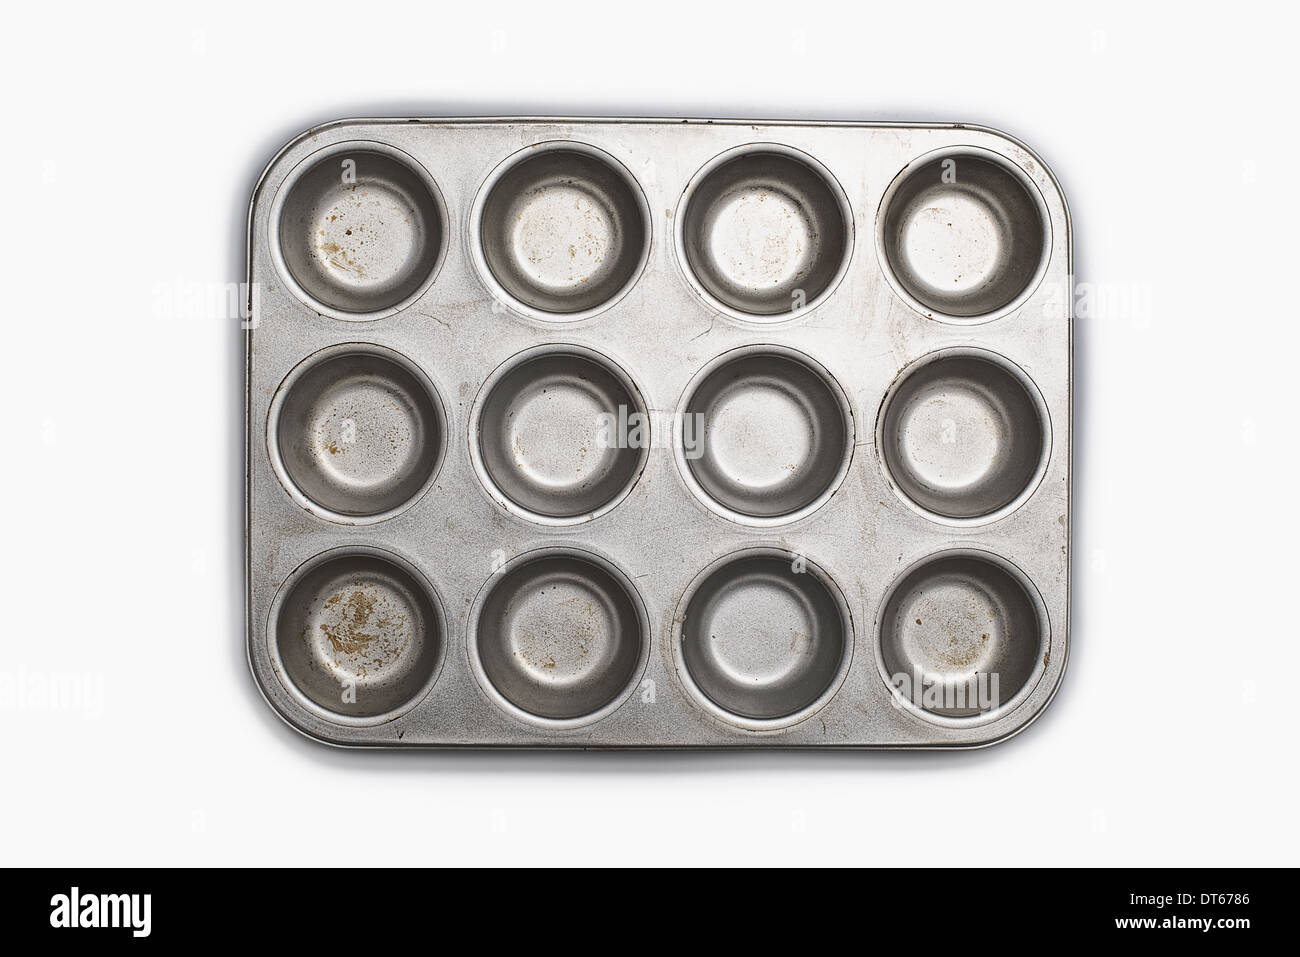 A well used, seasoned baking tray. Cookware.  A cupcake or muffin tin. Stock Photo